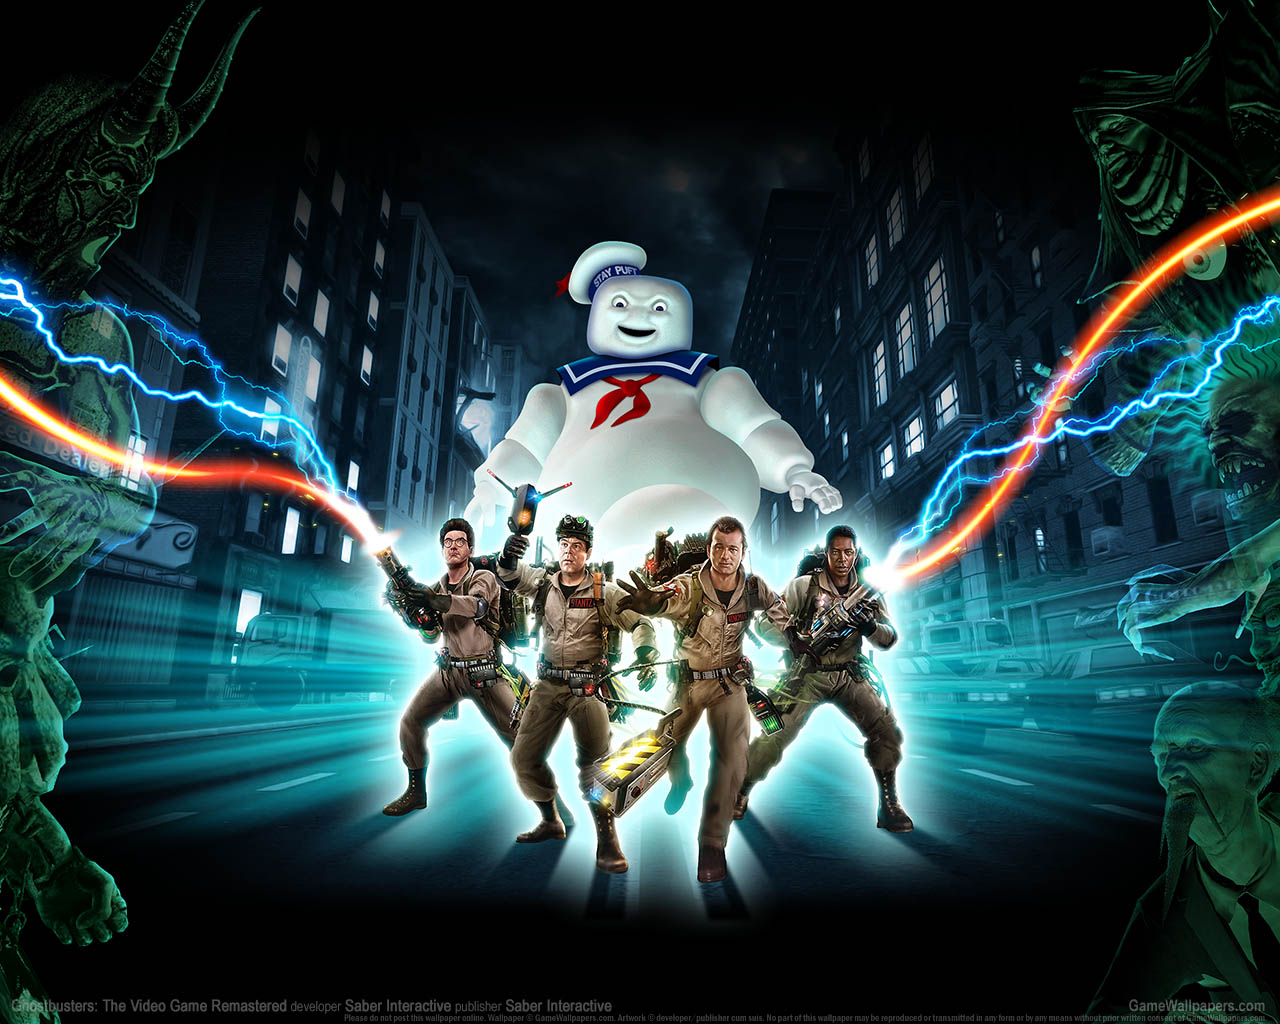 Ghostbusters%253A The Video Game Remastered wallpaper 01 1280x1024